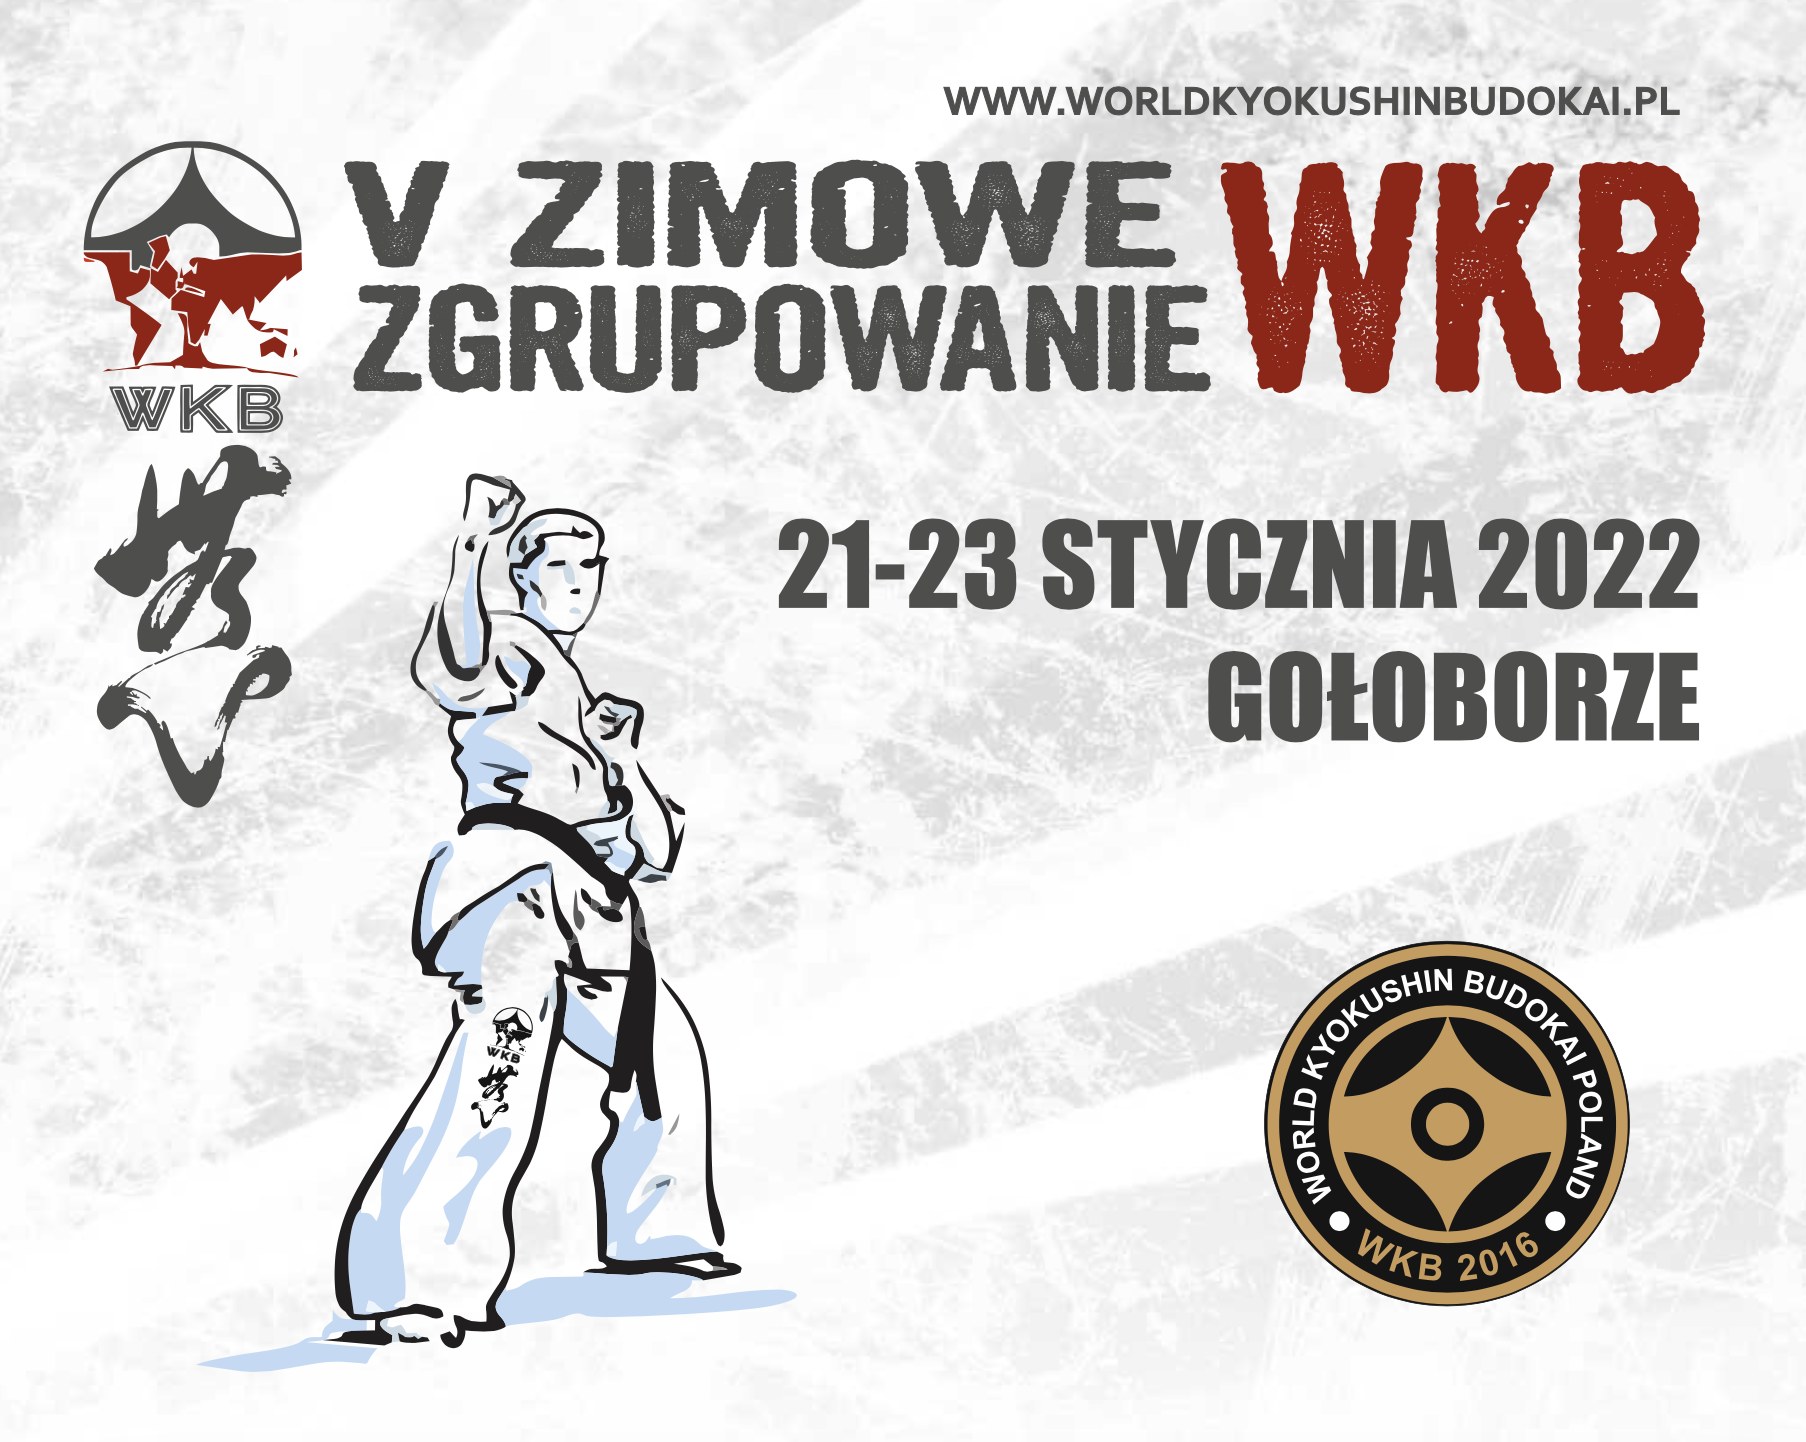 You are currently viewing Zgrupowanie WKB Poland